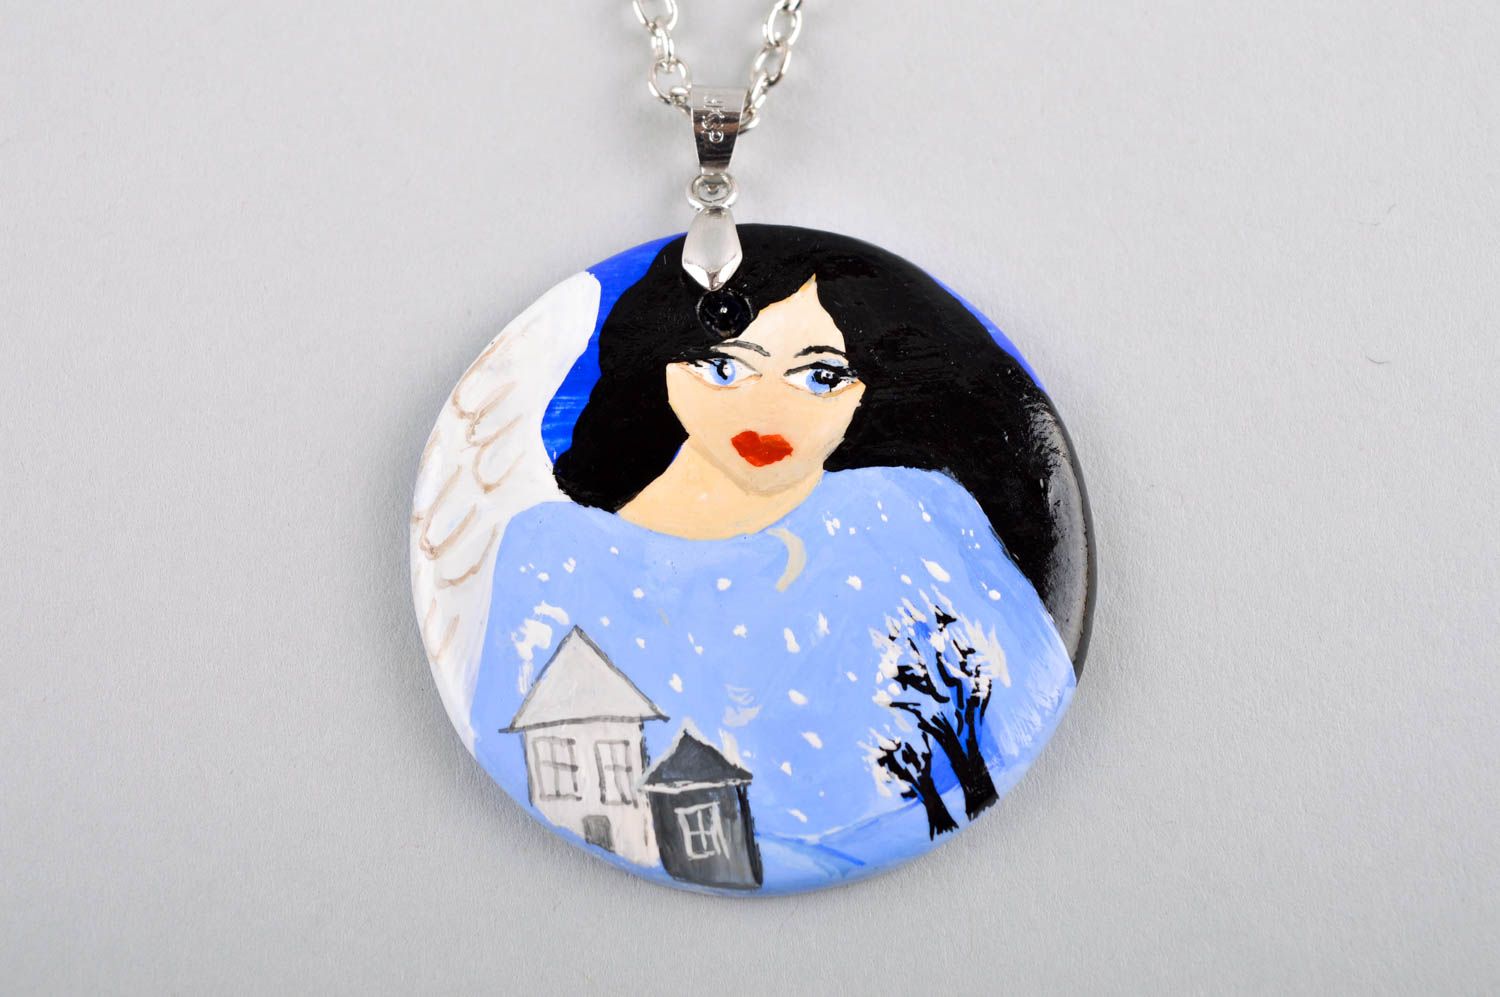 Unusual handmade plastic pendant fashion trends polymer clay ideas gifts for her photo 3